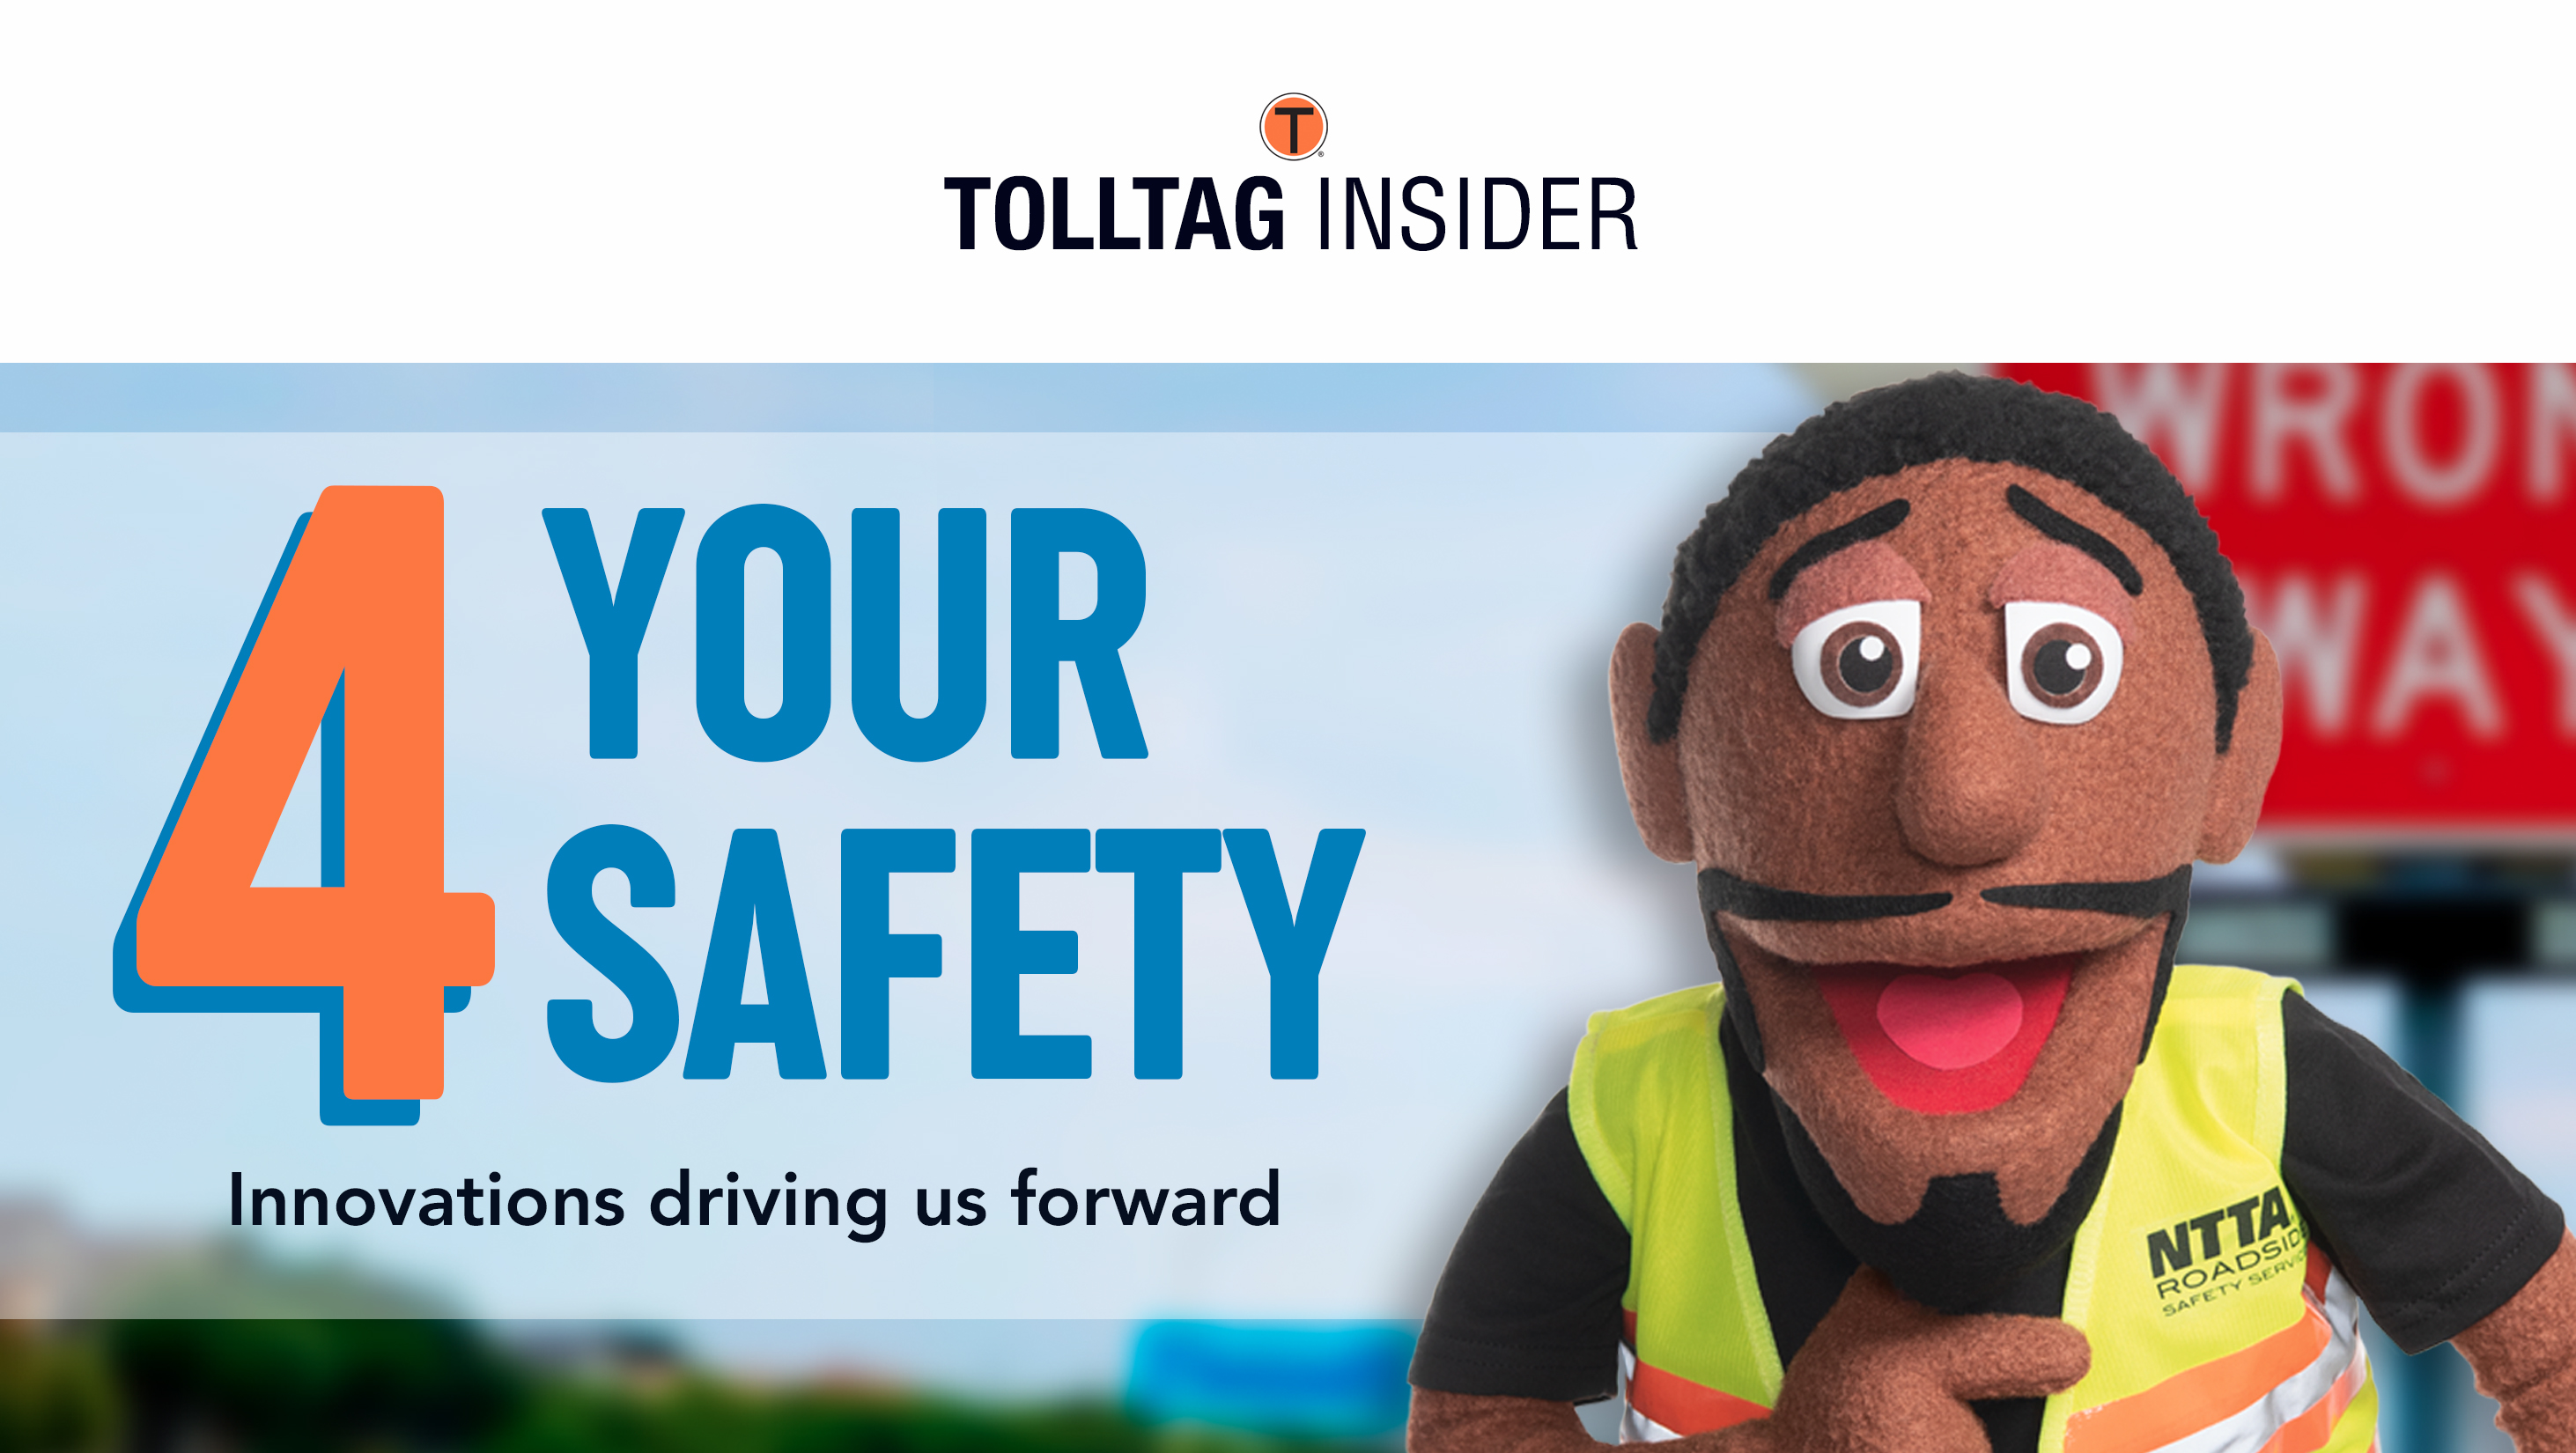 February TollTag Insider 4 Your Safety image